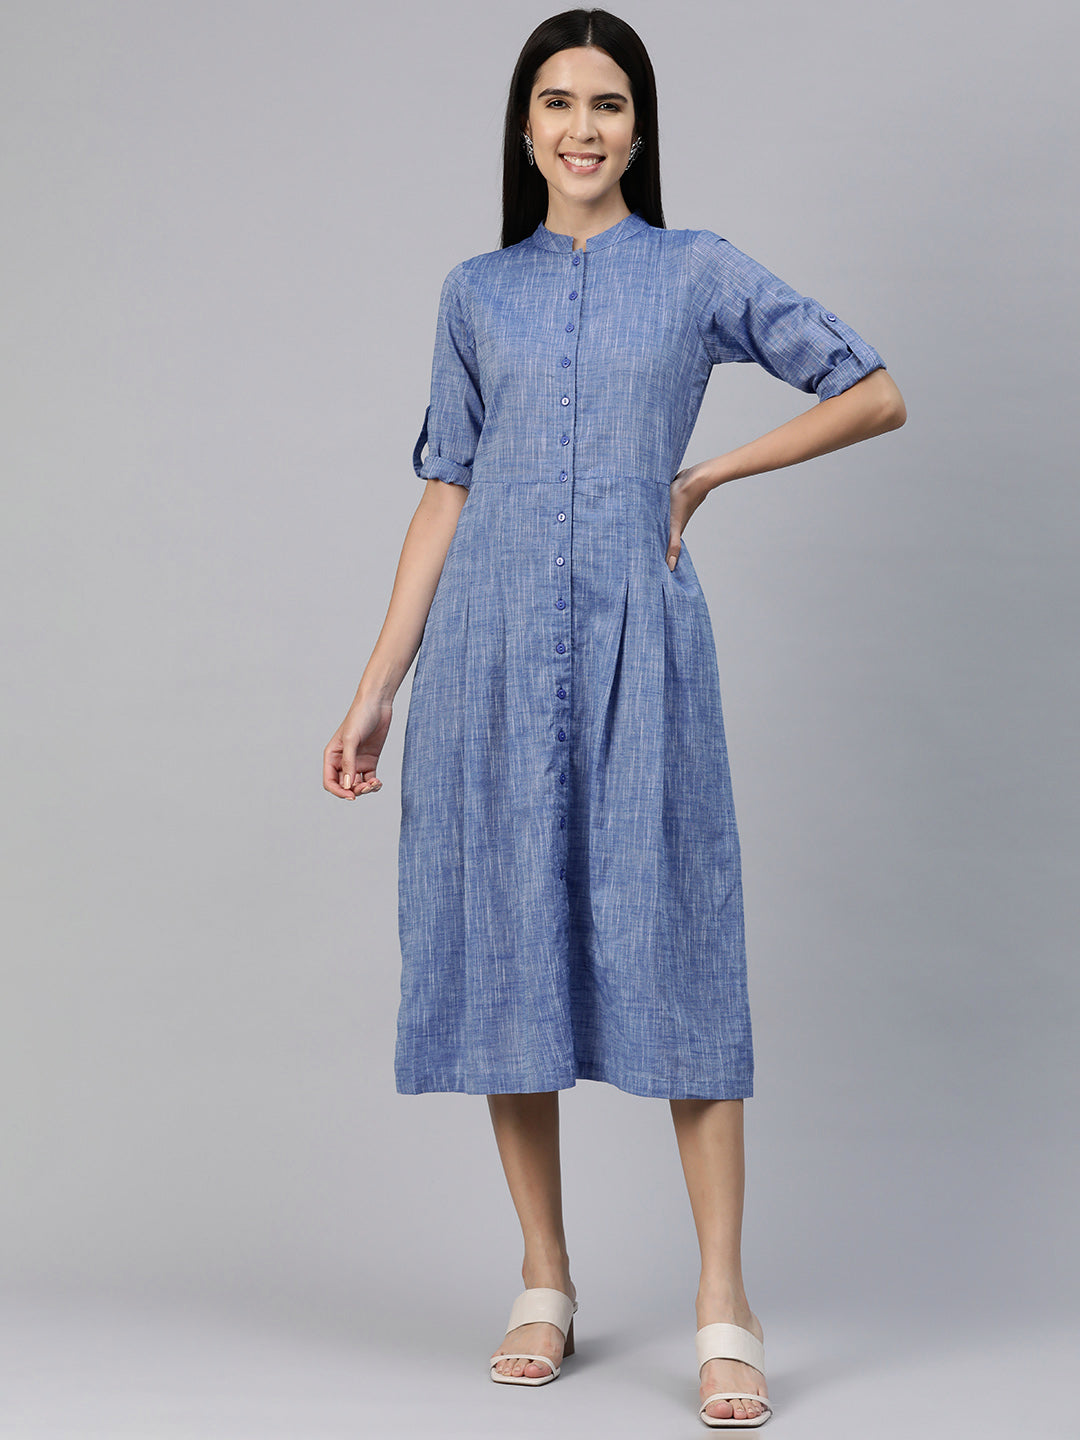 Collared Pleated Blue Dress